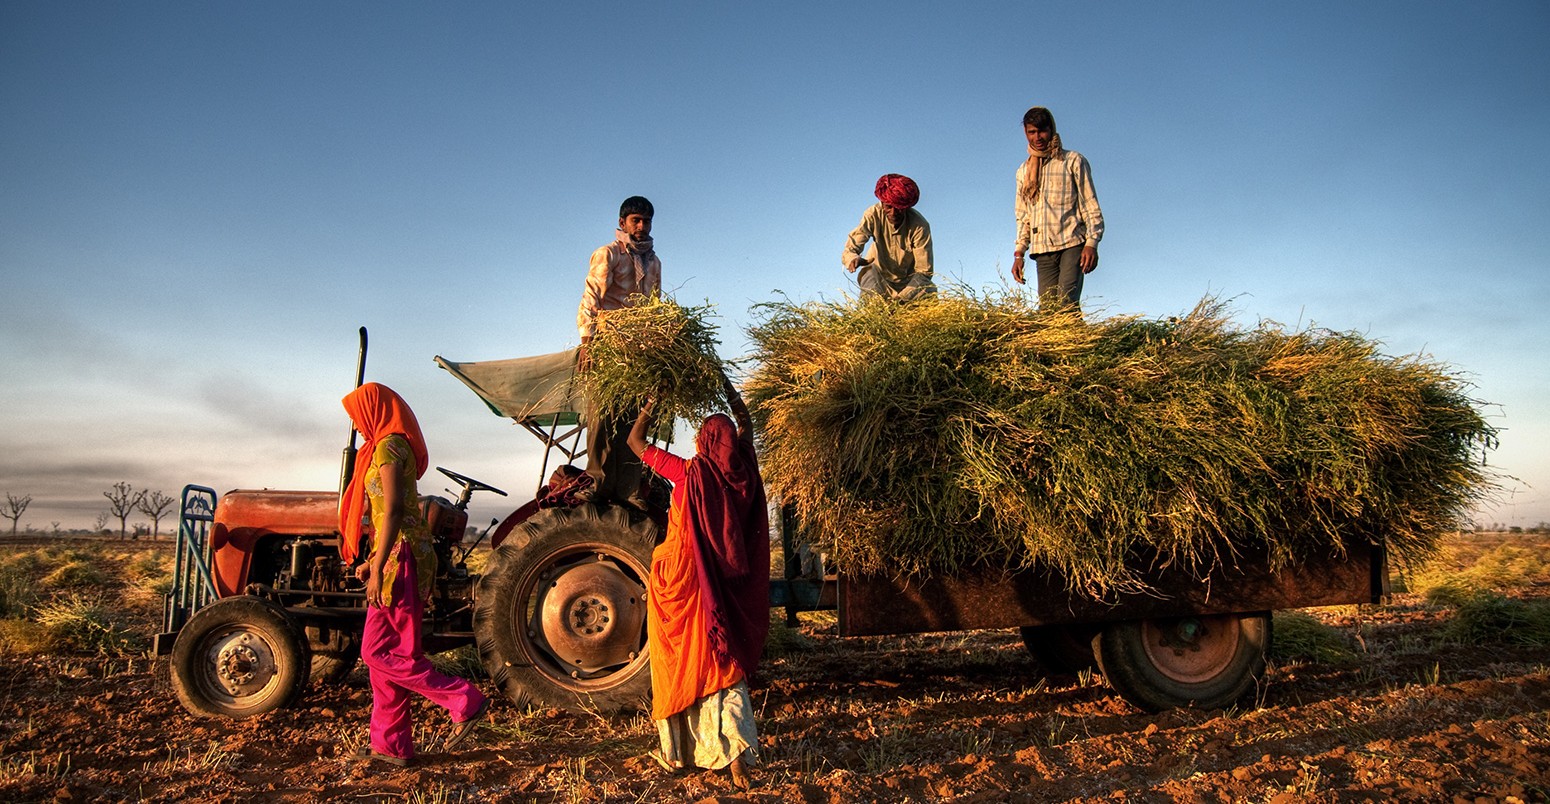 Family harvesting crops in a field, near Jaipur, India.